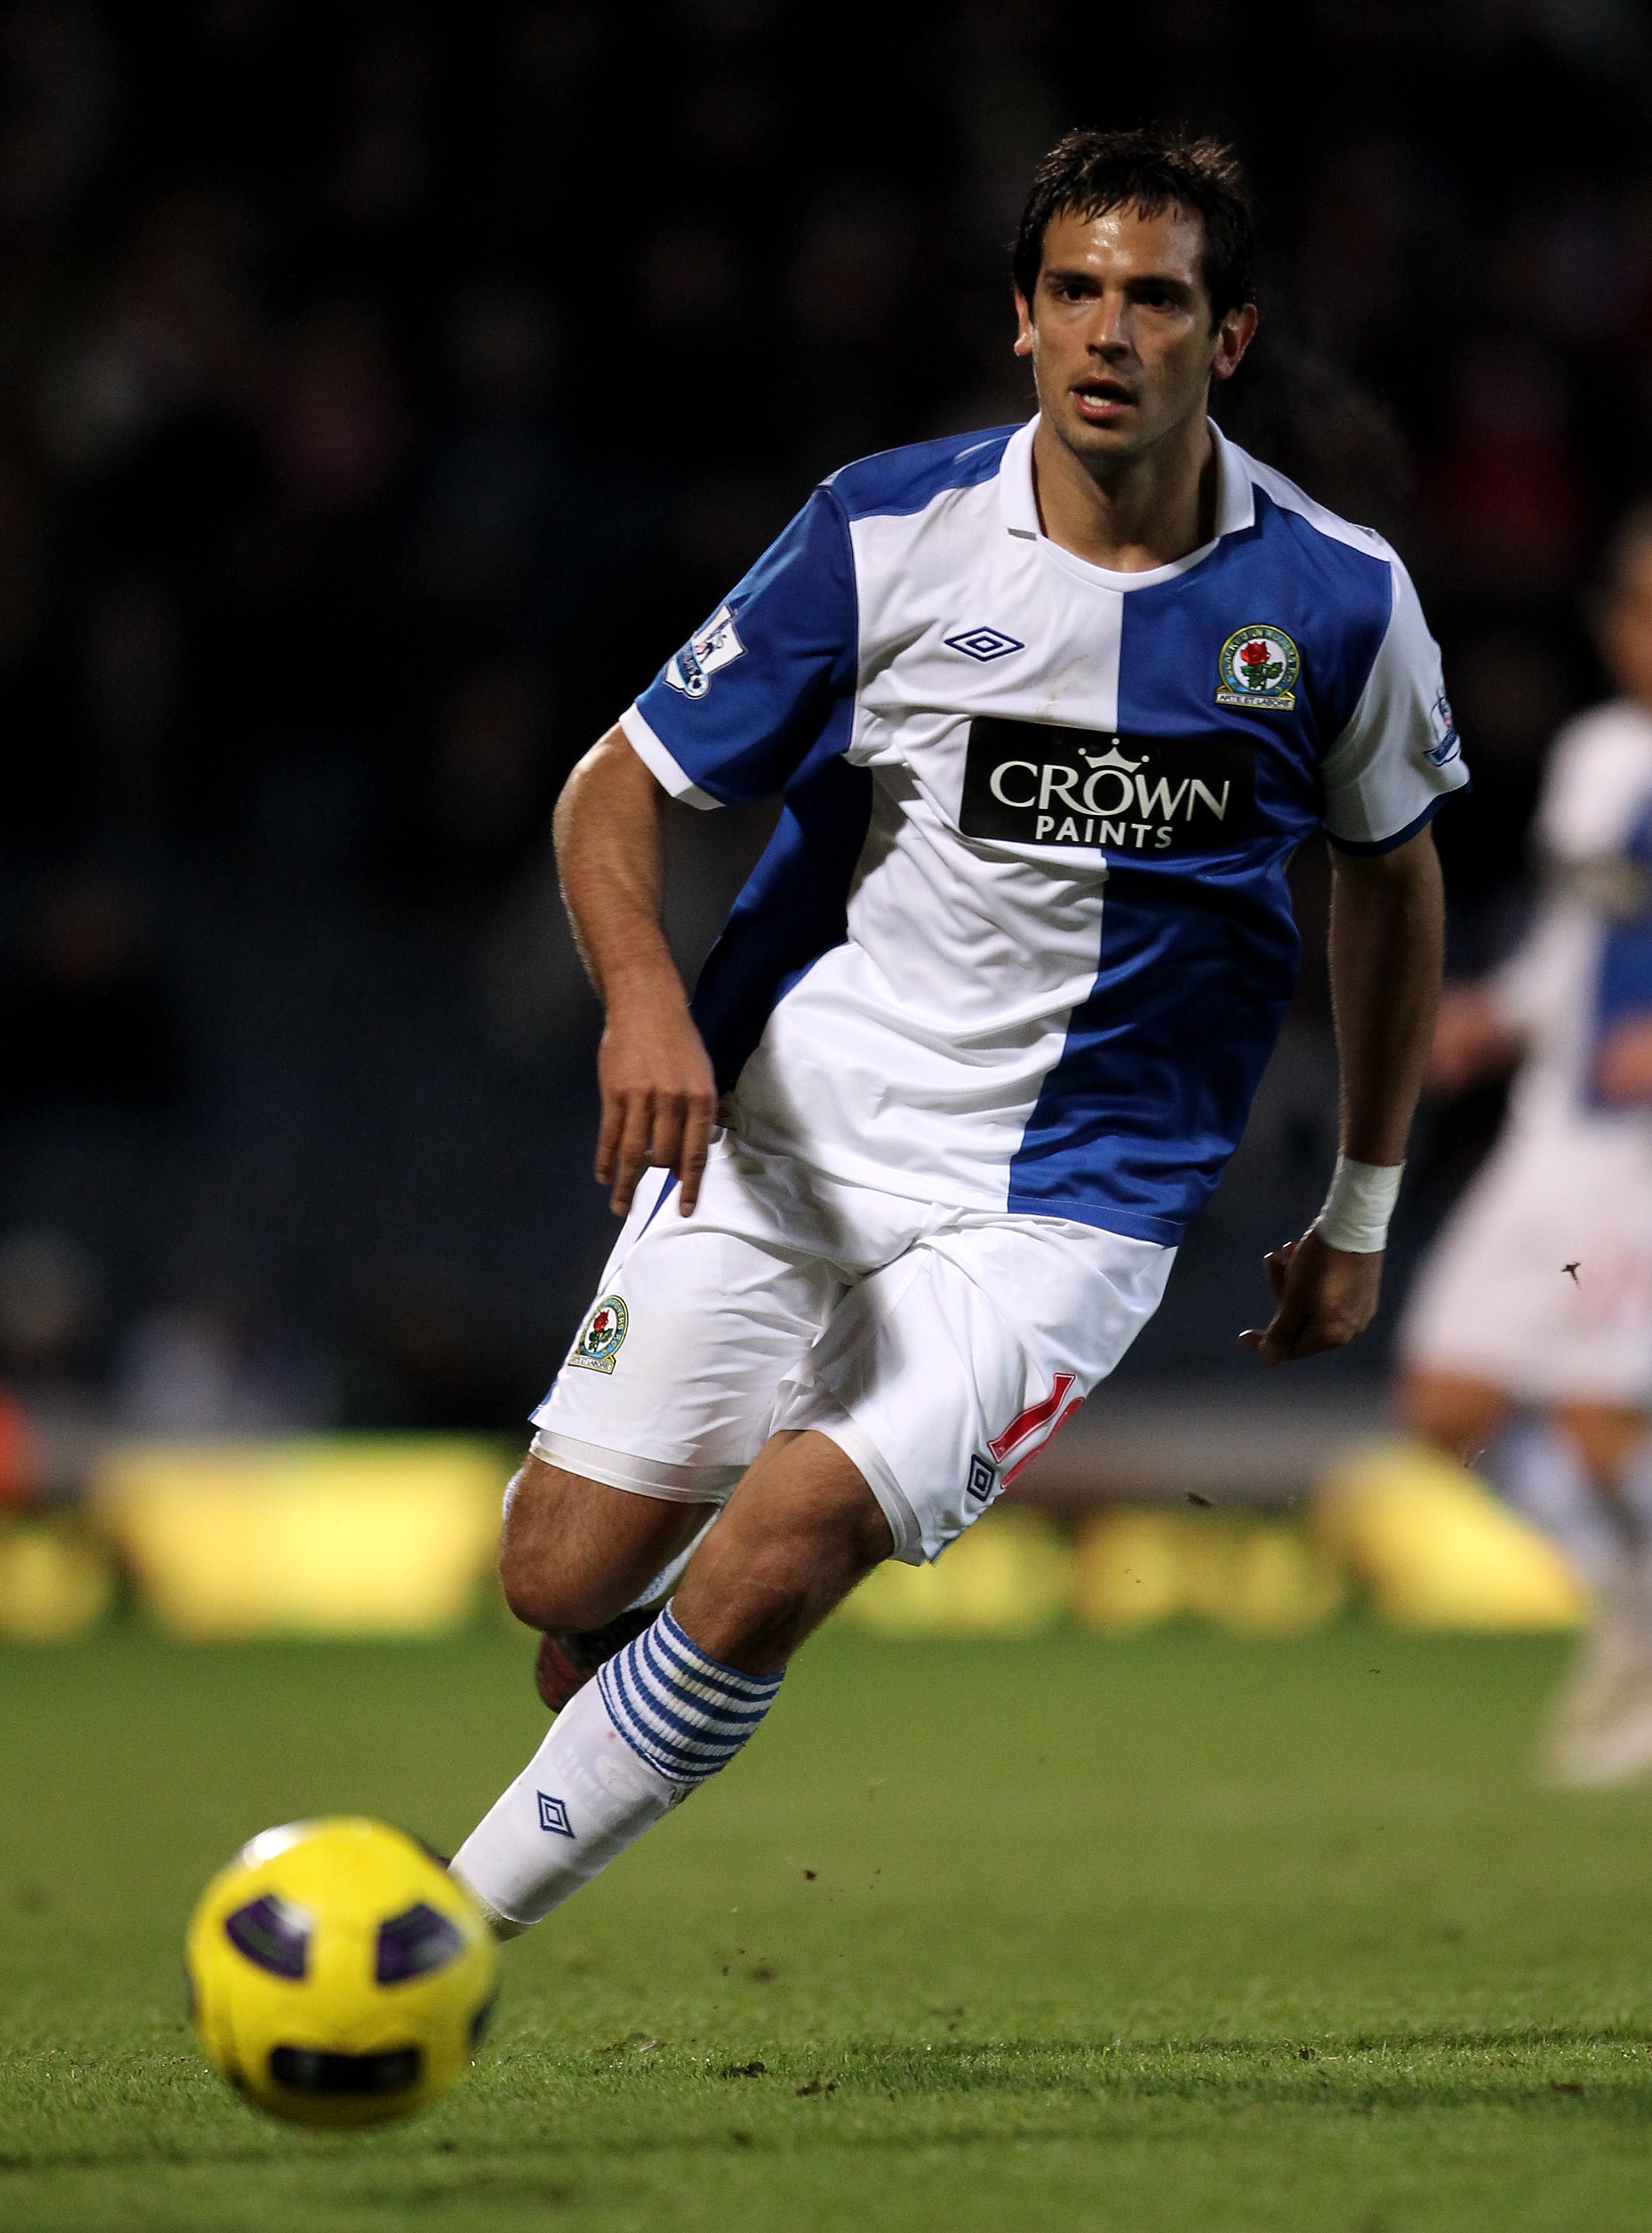 BLACKBURN, ENGLAND - JANUARY 23:  Roque Santa Cruz of Blackburn Rovers in action during the Barclays Premier League match between Blackburn Rovers and West Bromwich Albion at Ewood Park on January 23, 2011 in Blackburn, England.  (Photo by Alex Livesey/Ge